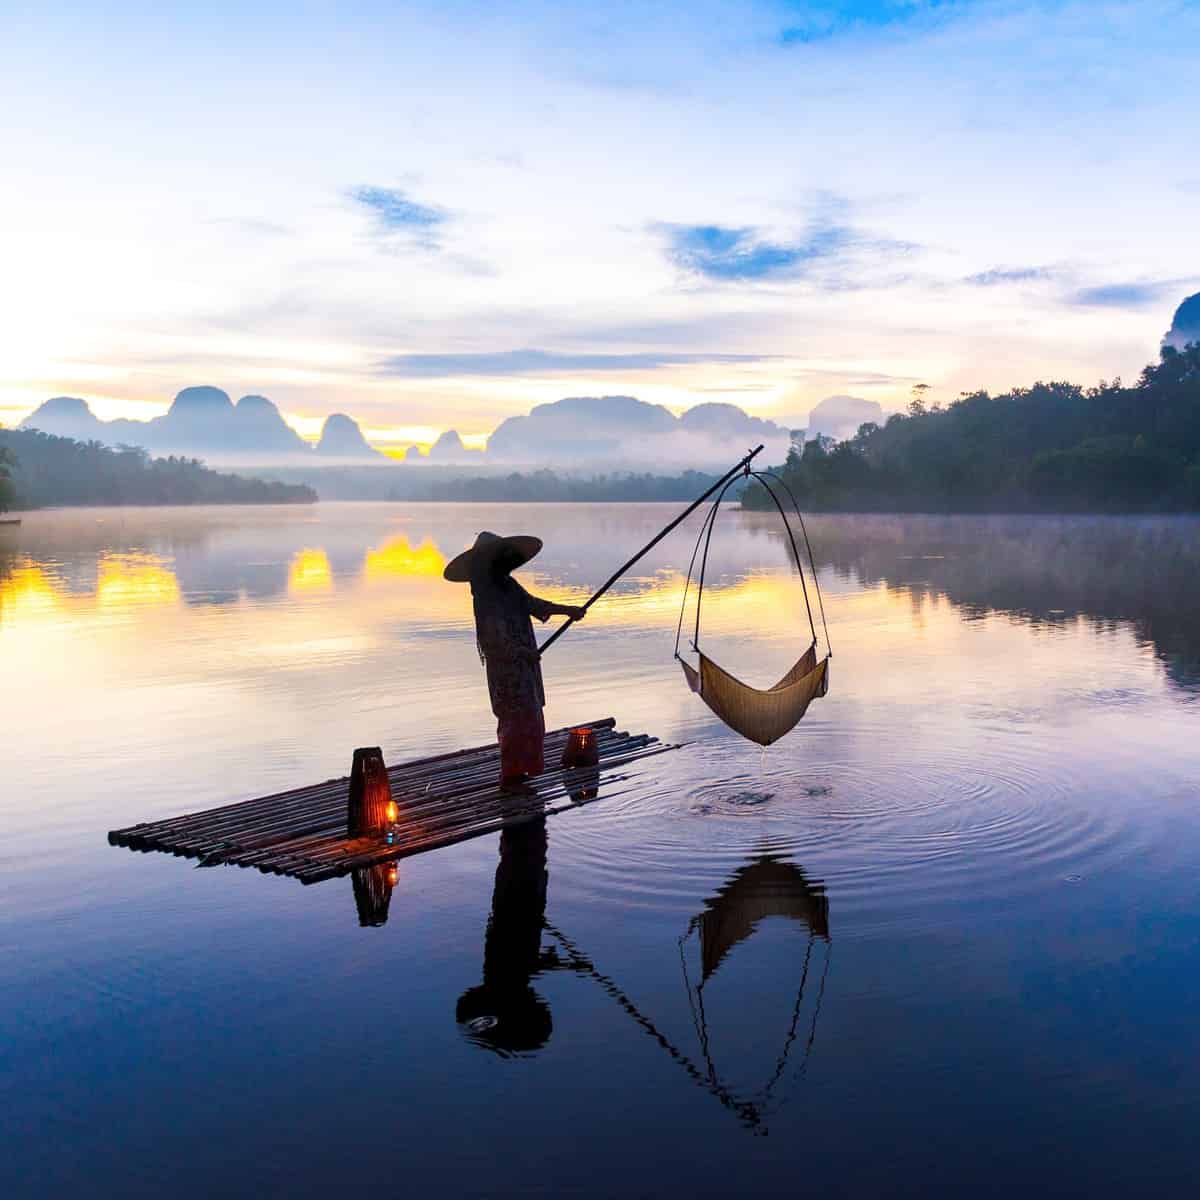 Fishing at Nong Talay in Krabi, Thailand in the morning.